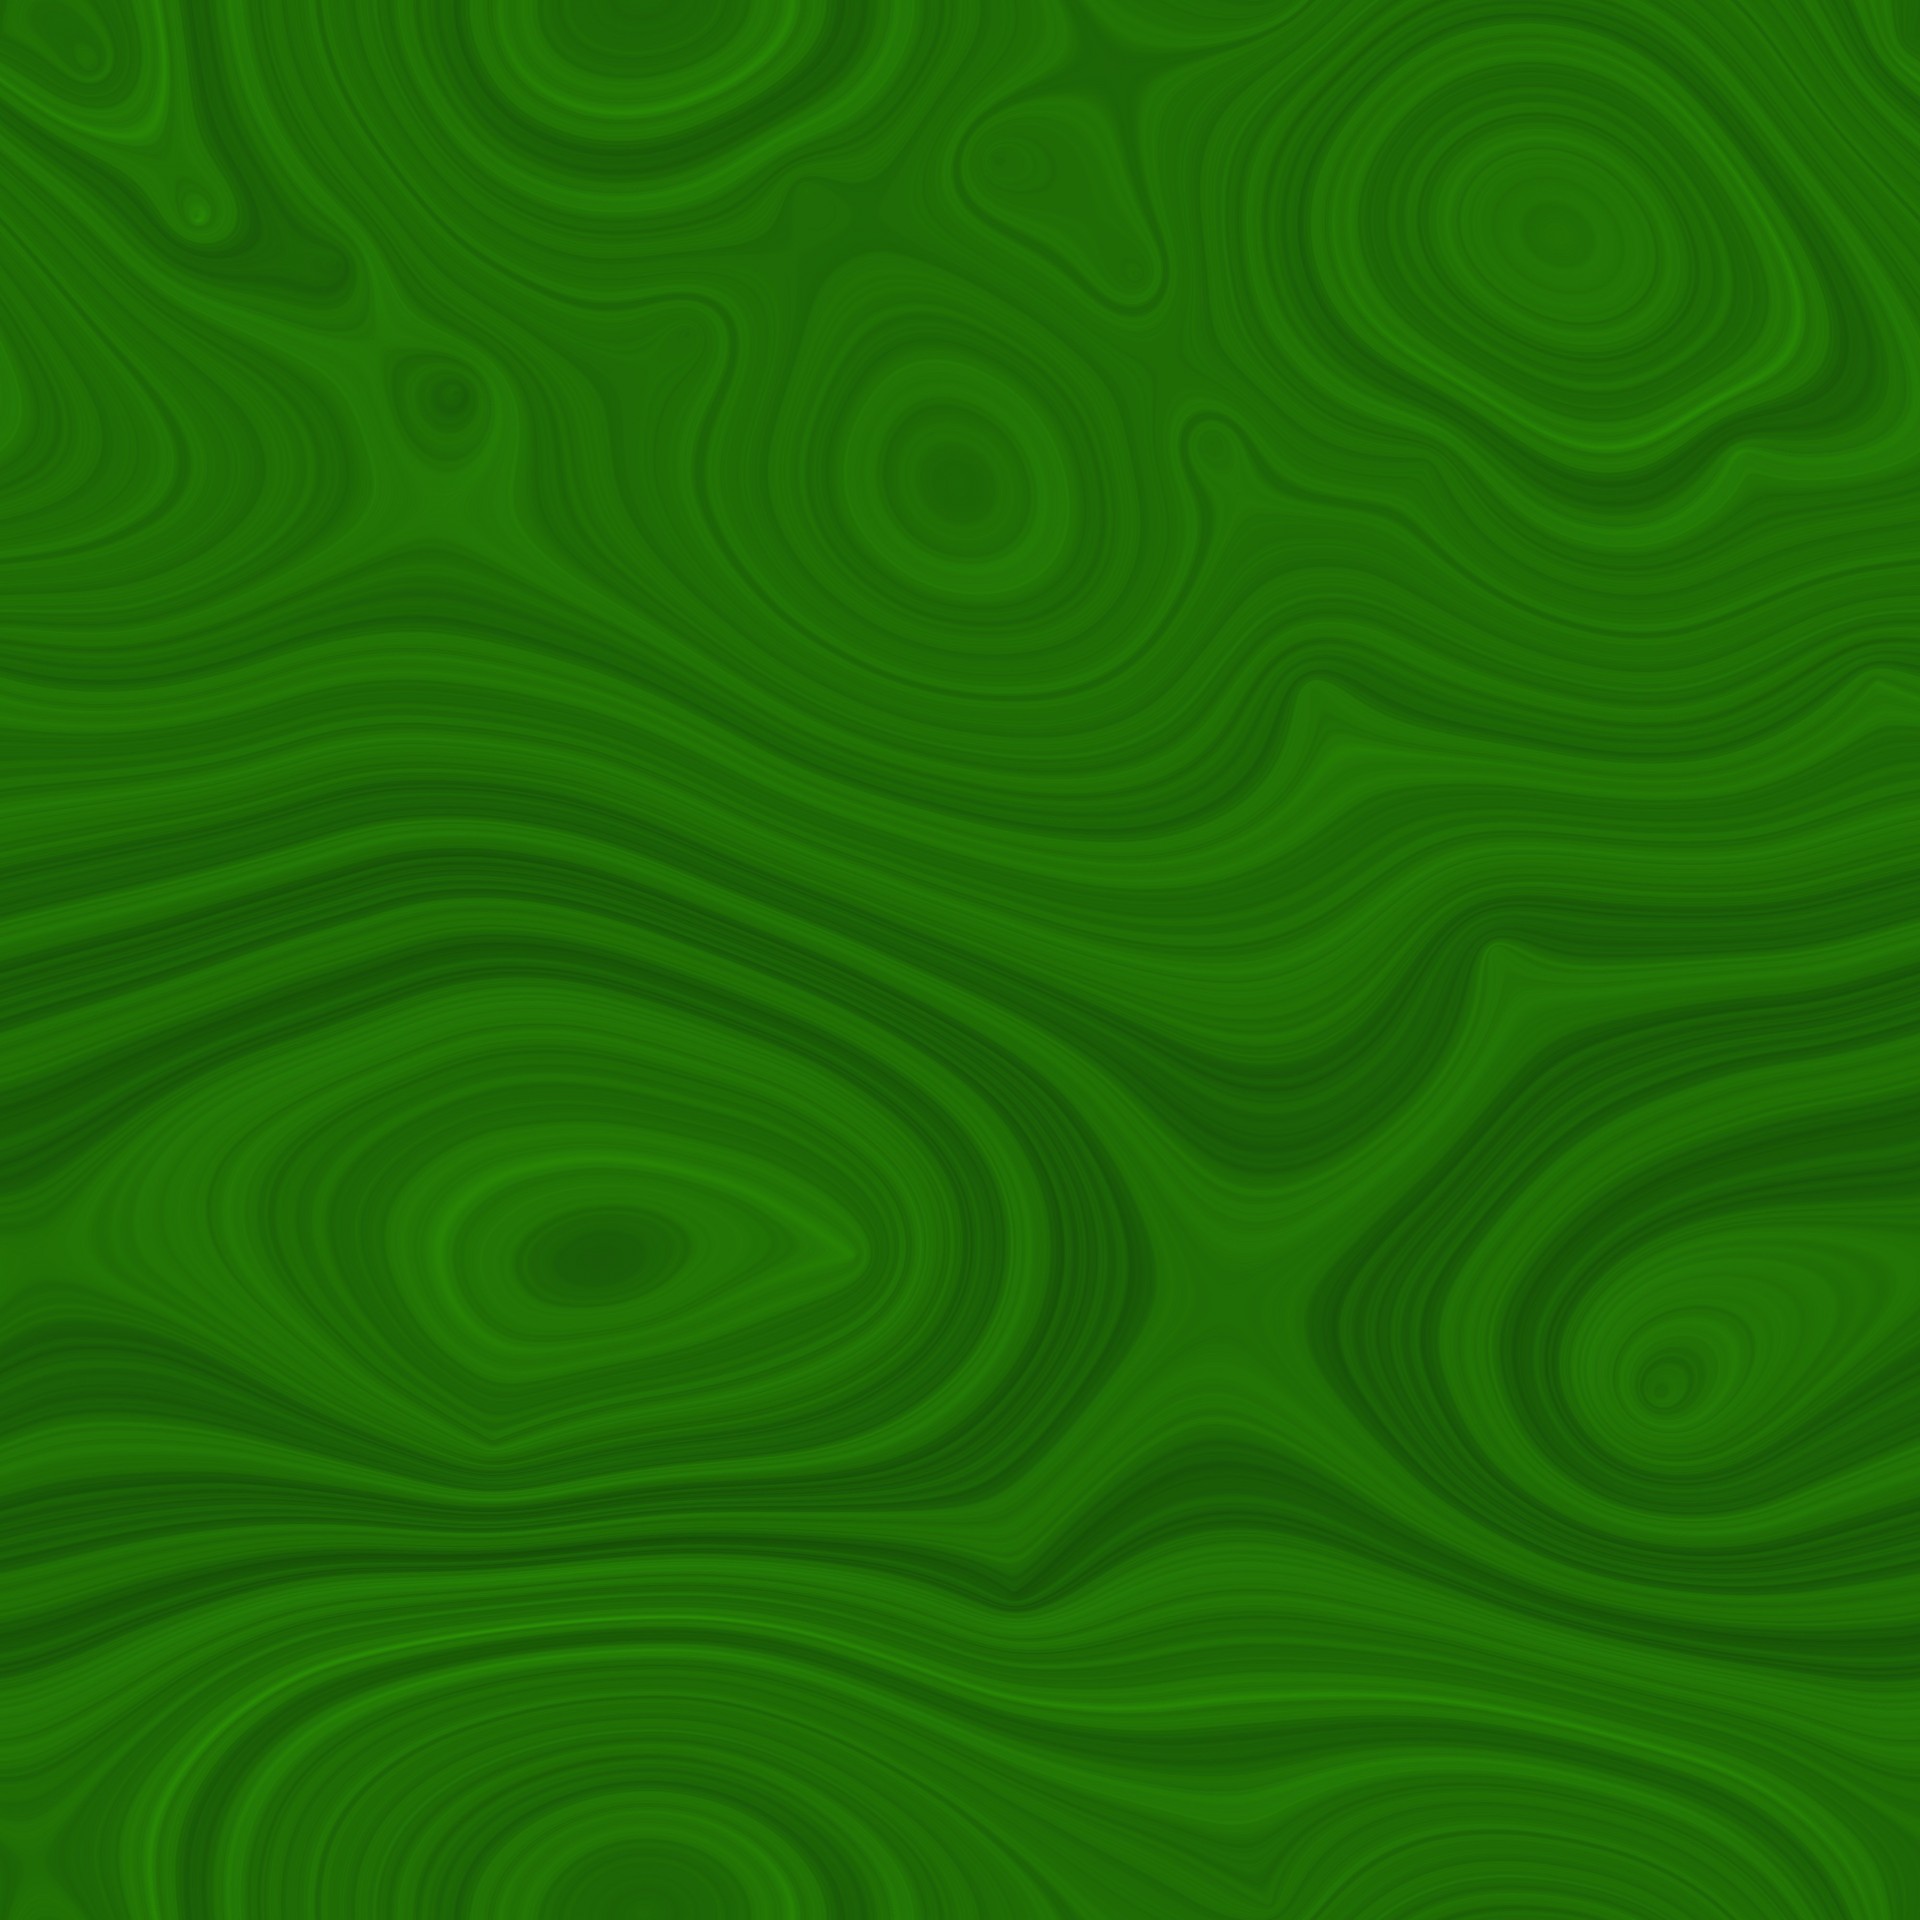 green waves background free photo